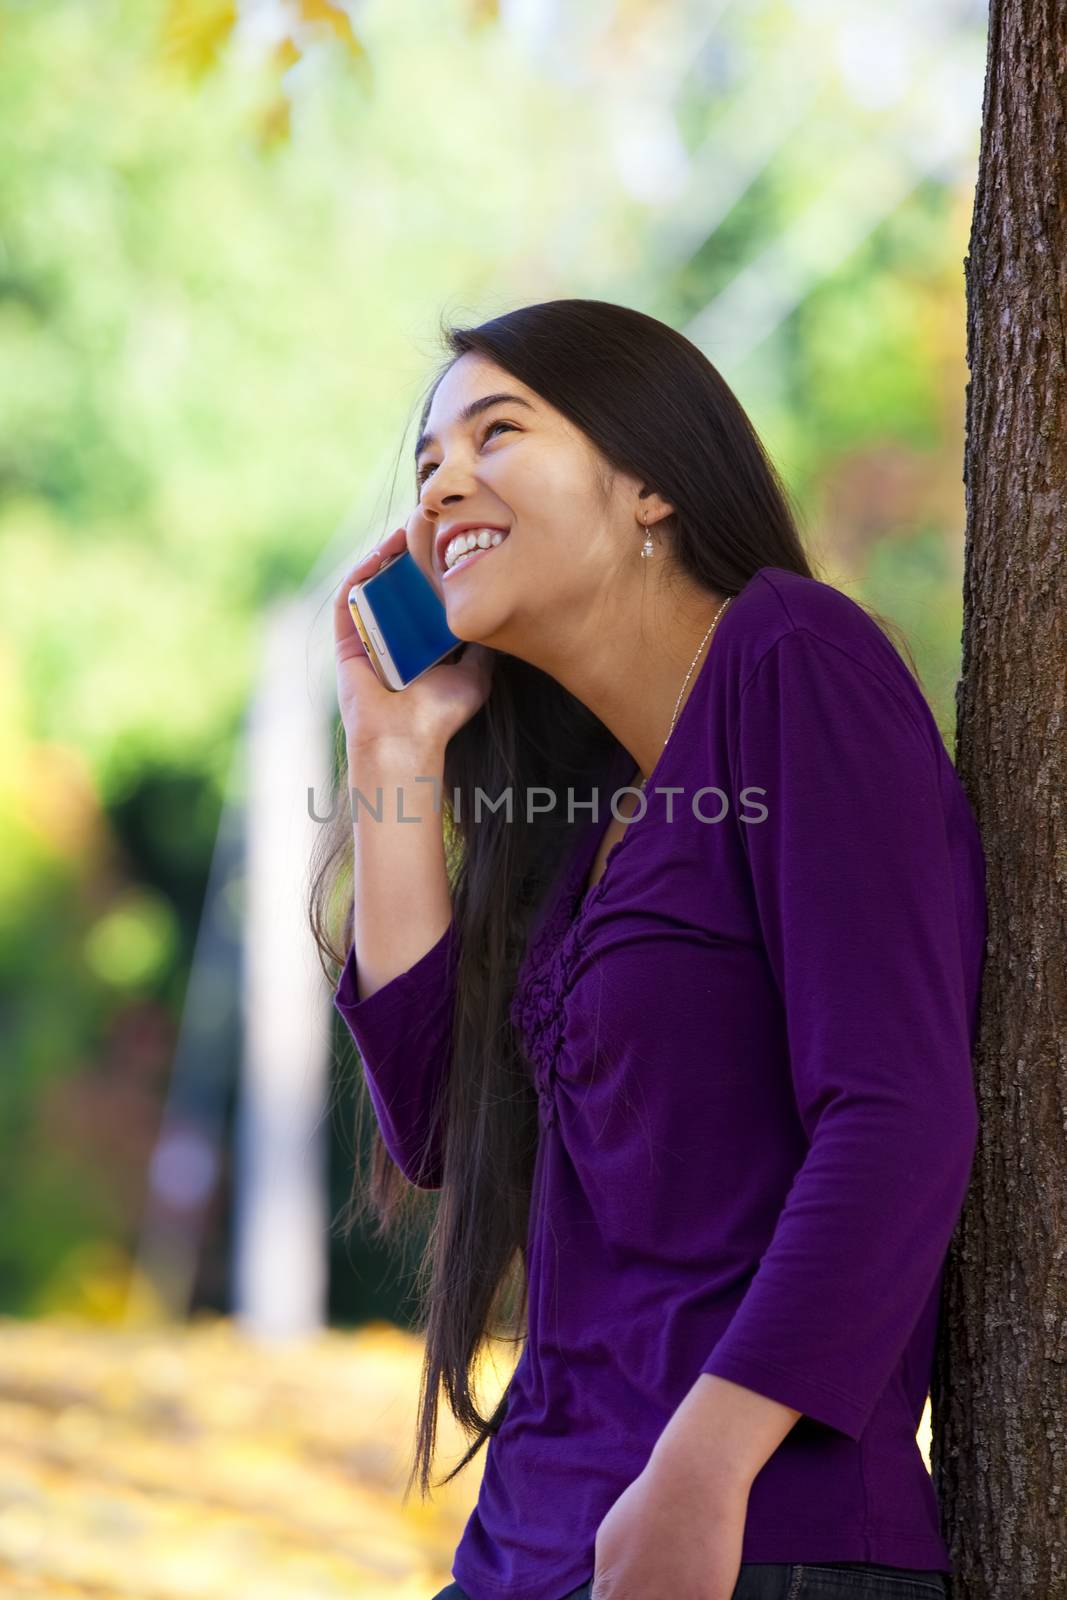 Beautiful biracial Asian Caucasian teen girl leaning against tree talking happily on cell phone, autumn leaves on ground